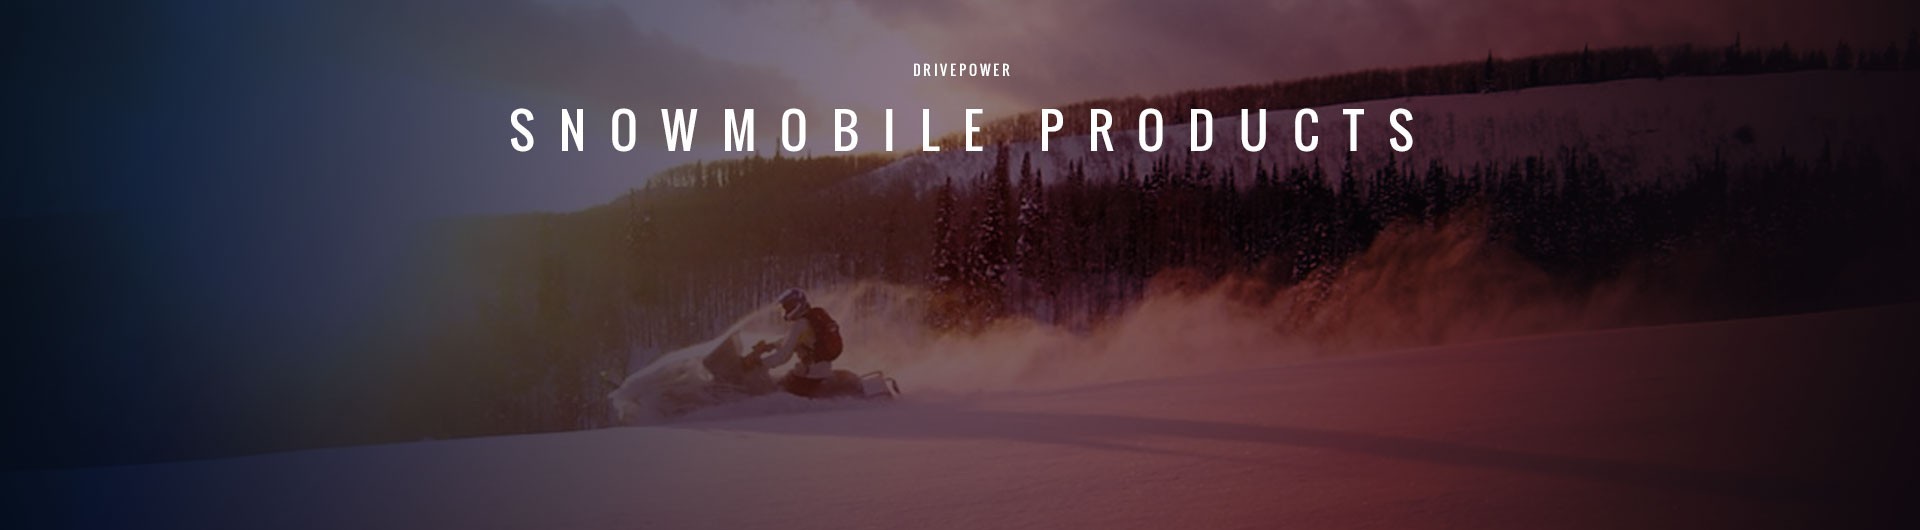 Drivepower Snowmobile Products